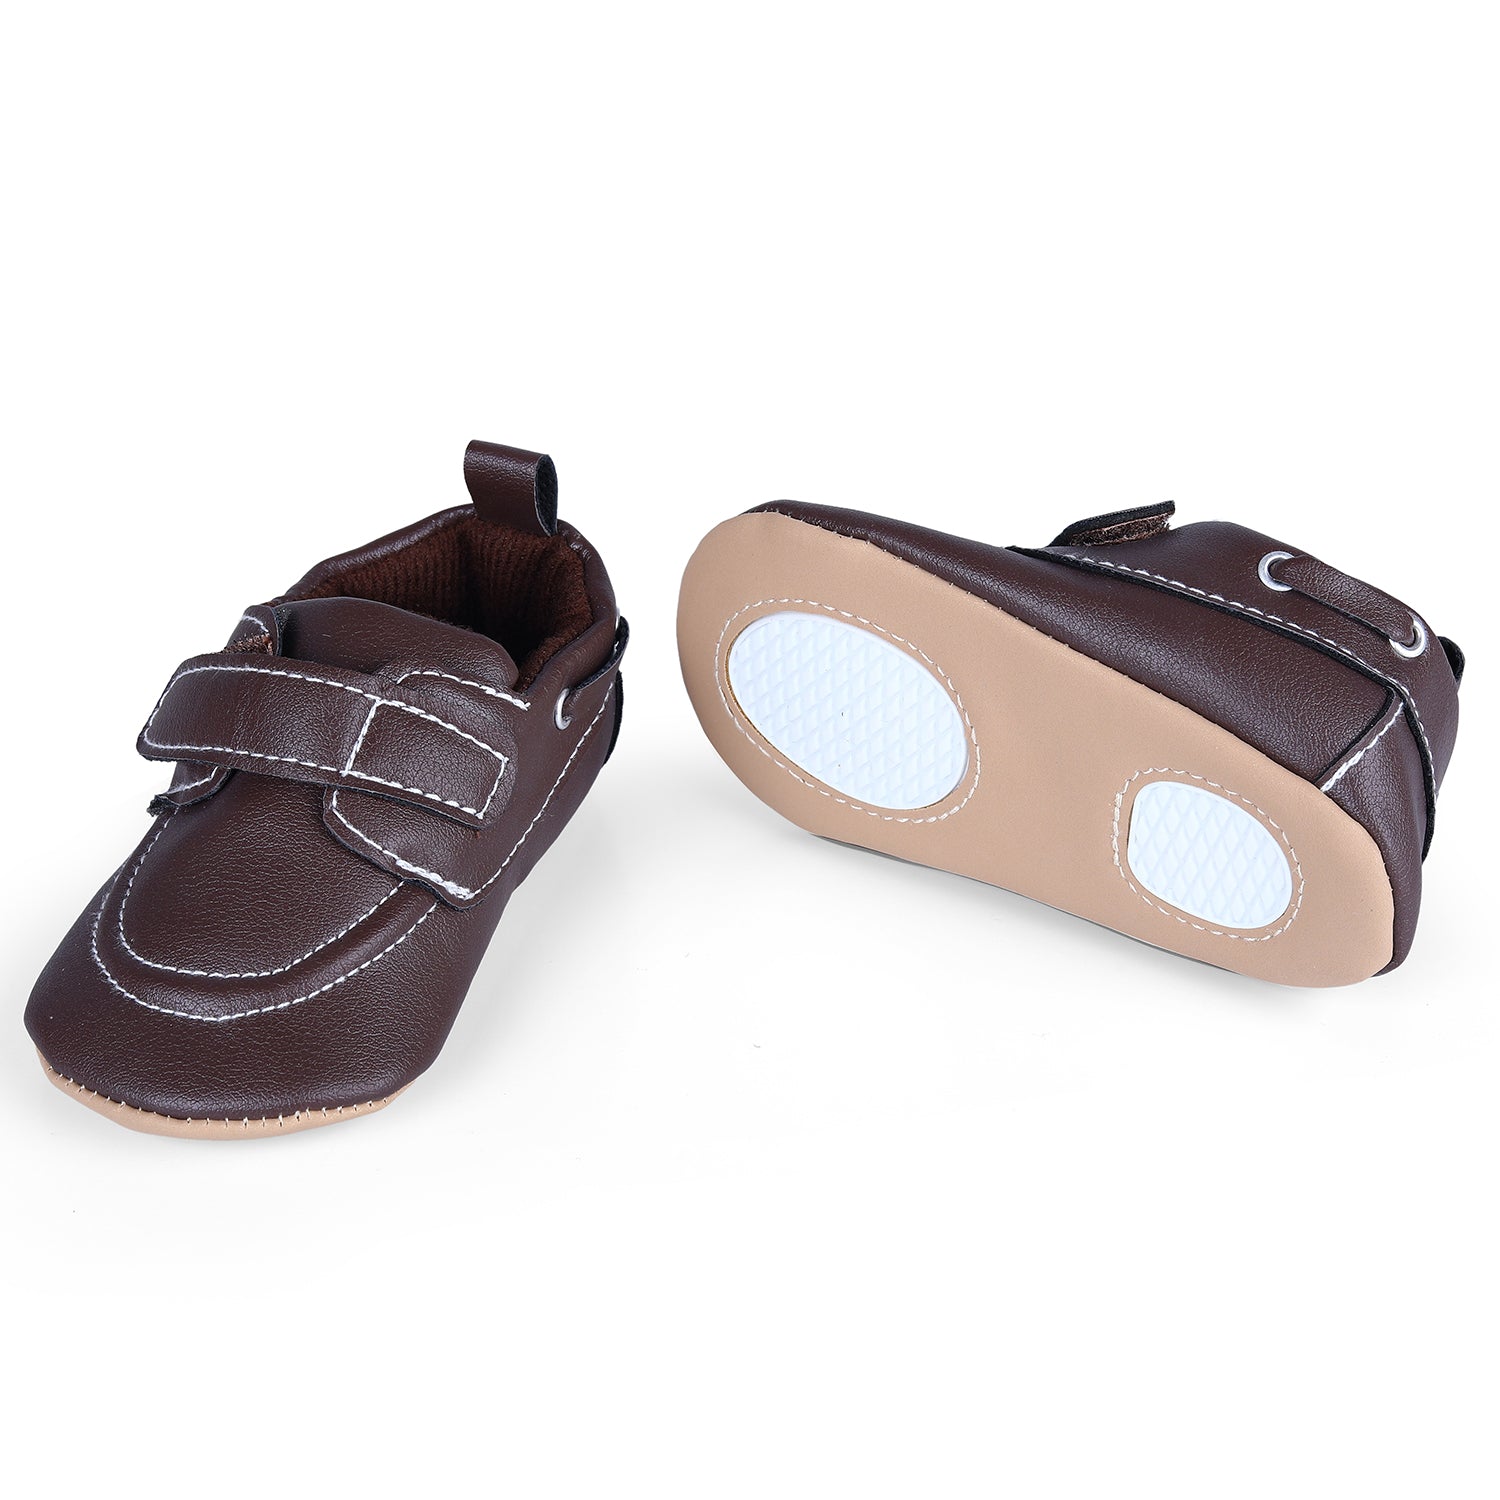 Solid Hookloop Stylish Leather Velcro Shoes - Brown - Baby Moo